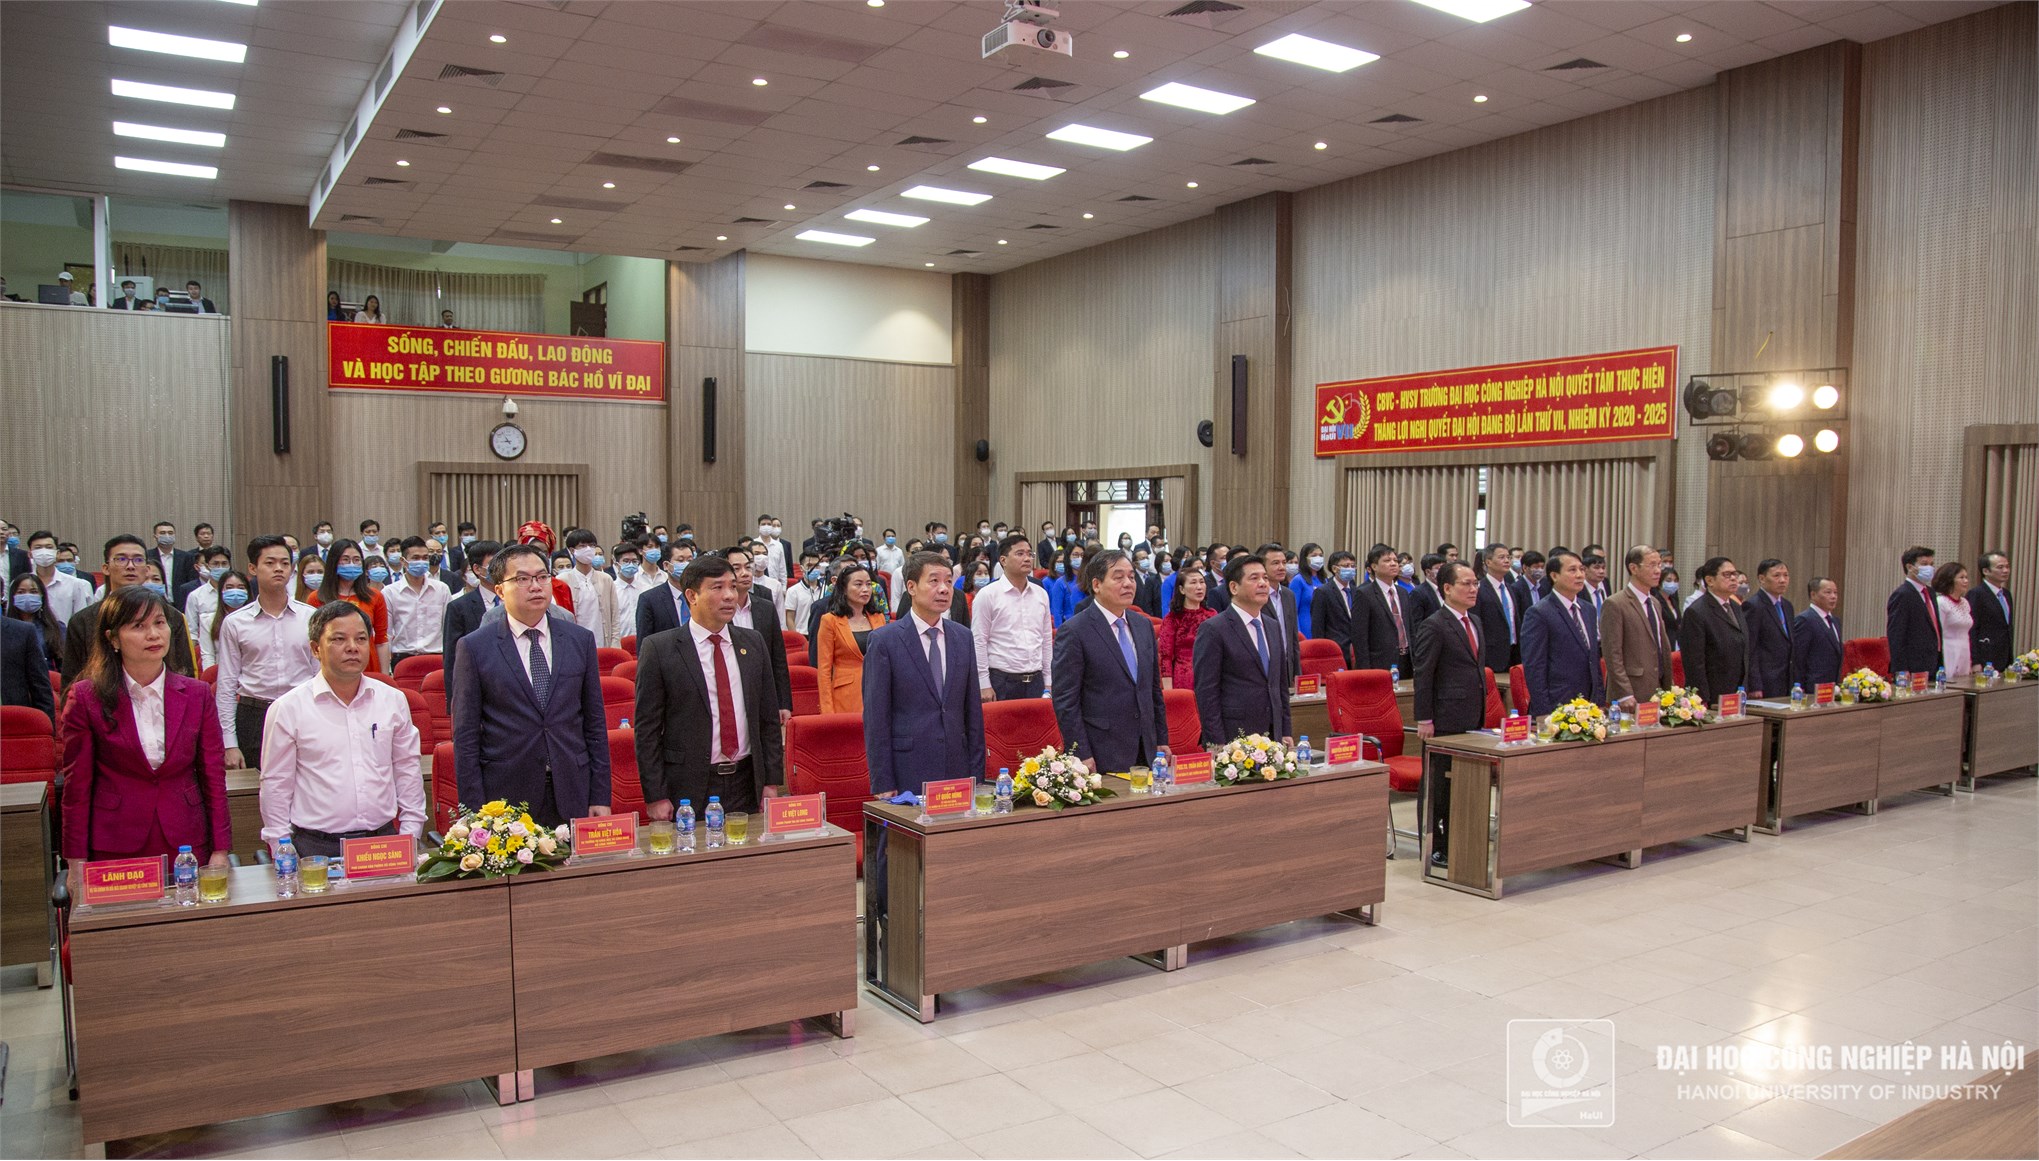 Opening ceremony of the academic year 2021 - 2022